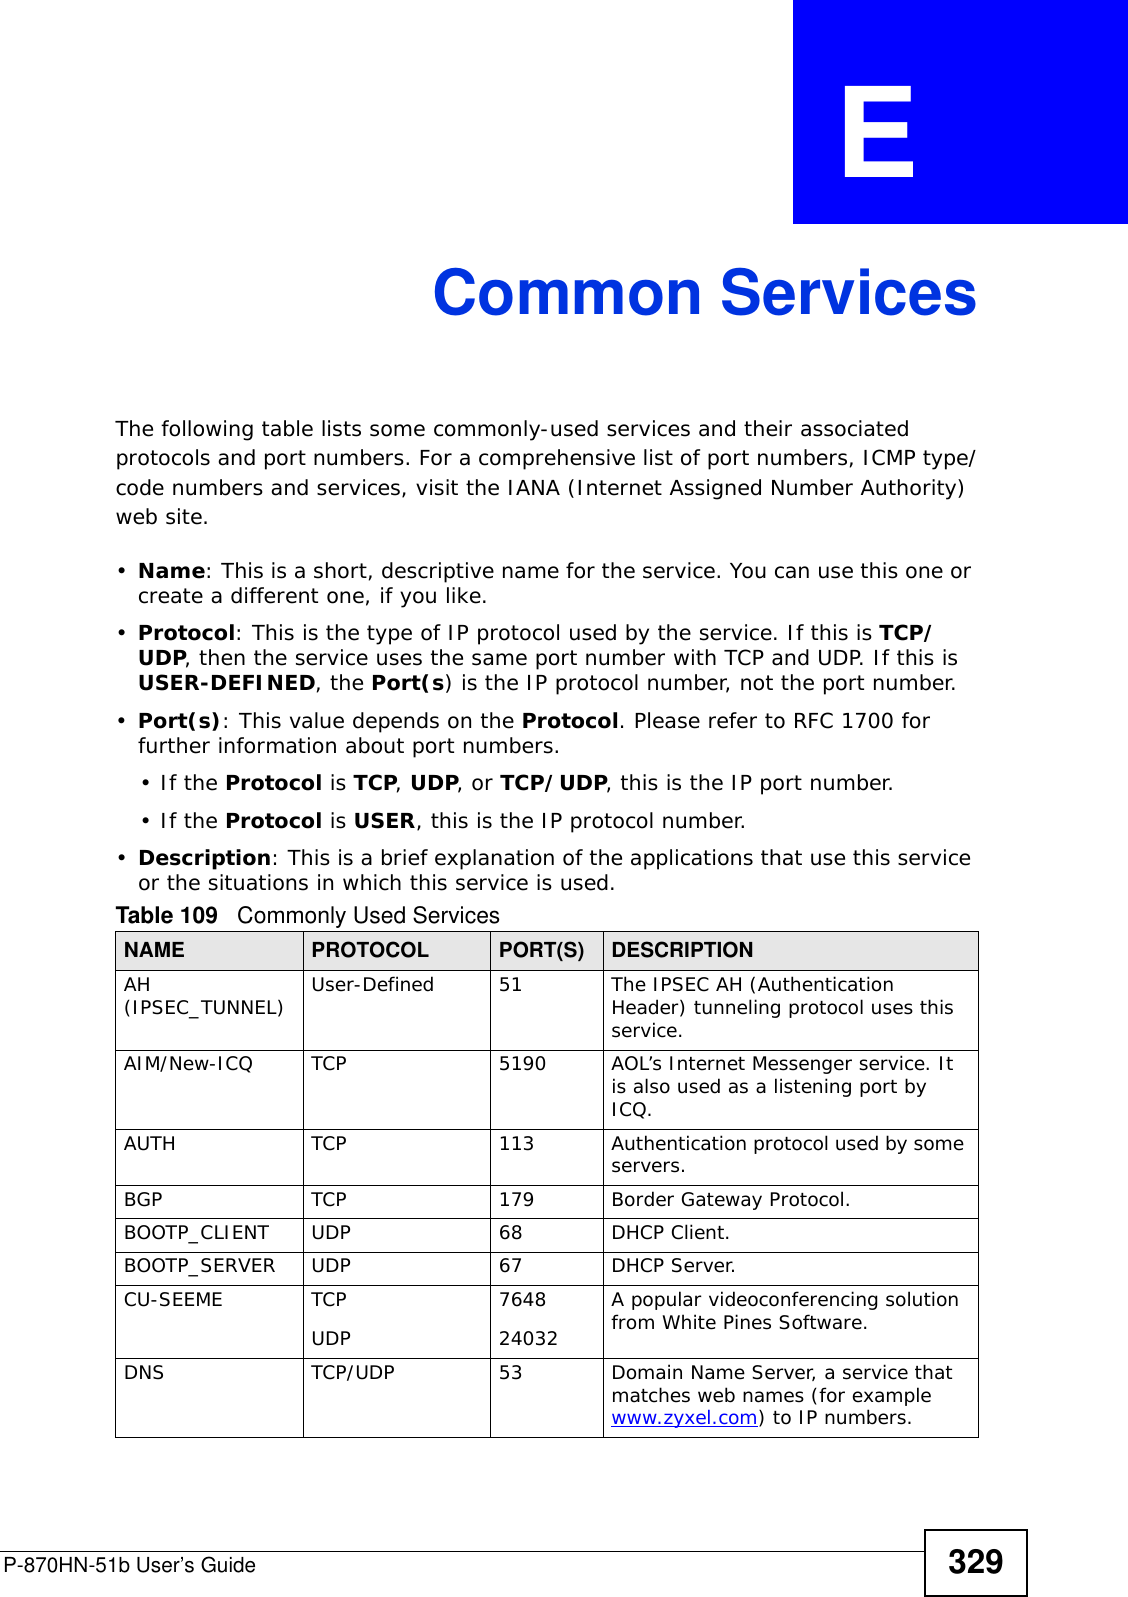 P-870HN-51b User’s Guide 329APPENDIX  E Common ServicesThe following table lists some commonly-used services and their associated protocols and port numbers. For a comprehensive list of port numbers, ICMP type/code numbers and services, visit the IANA (Internet Assigned Number Authority) web site. •Name: This is a short, descriptive name for the service. You can use this one or create a different one, if you like.•Protocol: This is the type of IP protocol used by the service. If this is TCP/UDP, then the service uses the same port number with TCP and UDP. If this is USER-DEFINED, the Port(s) is the IP protocol number, not the port number.•Port(s): This value depends on the Protocol. Please refer to RFC 1700 for further information about port numbers.•If the Protocol is TCP, UDP, or TCP/UDP, this is the IP port number.•If the Protocol is USER, this is the IP protocol number.•Description: This is a brief explanation of the applications that use this service or the situations in which this service is used.Table 109   Commonly Used ServicesNAME PROTOCOL PORT(S) DESCRIPTIONAH (IPSEC_TUNNEL) User-Defined 51 The IPSEC AH (Authentication Header) tunneling protocol uses this service.AIM/New-ICQ TCP 5190 AOL’s Internet Messenger service. It is also used as a listening port by ICQ.AUTH TCP 113 Authentication protocol used by some servers.BGP TCP 179 Border Gateway Protocol.BOOTP_CLIENT UDP 68 DHCP Client.BOOTP_SERVER UDP 67 DHCP Server.CU-SEEME TCPUDP764824032A popular videoconferencing solution from White Pines Software.DNS TCP/UDP 53 Domain Name Server, a service that matches web names (for example www.zyxel.com) to IP numbers.